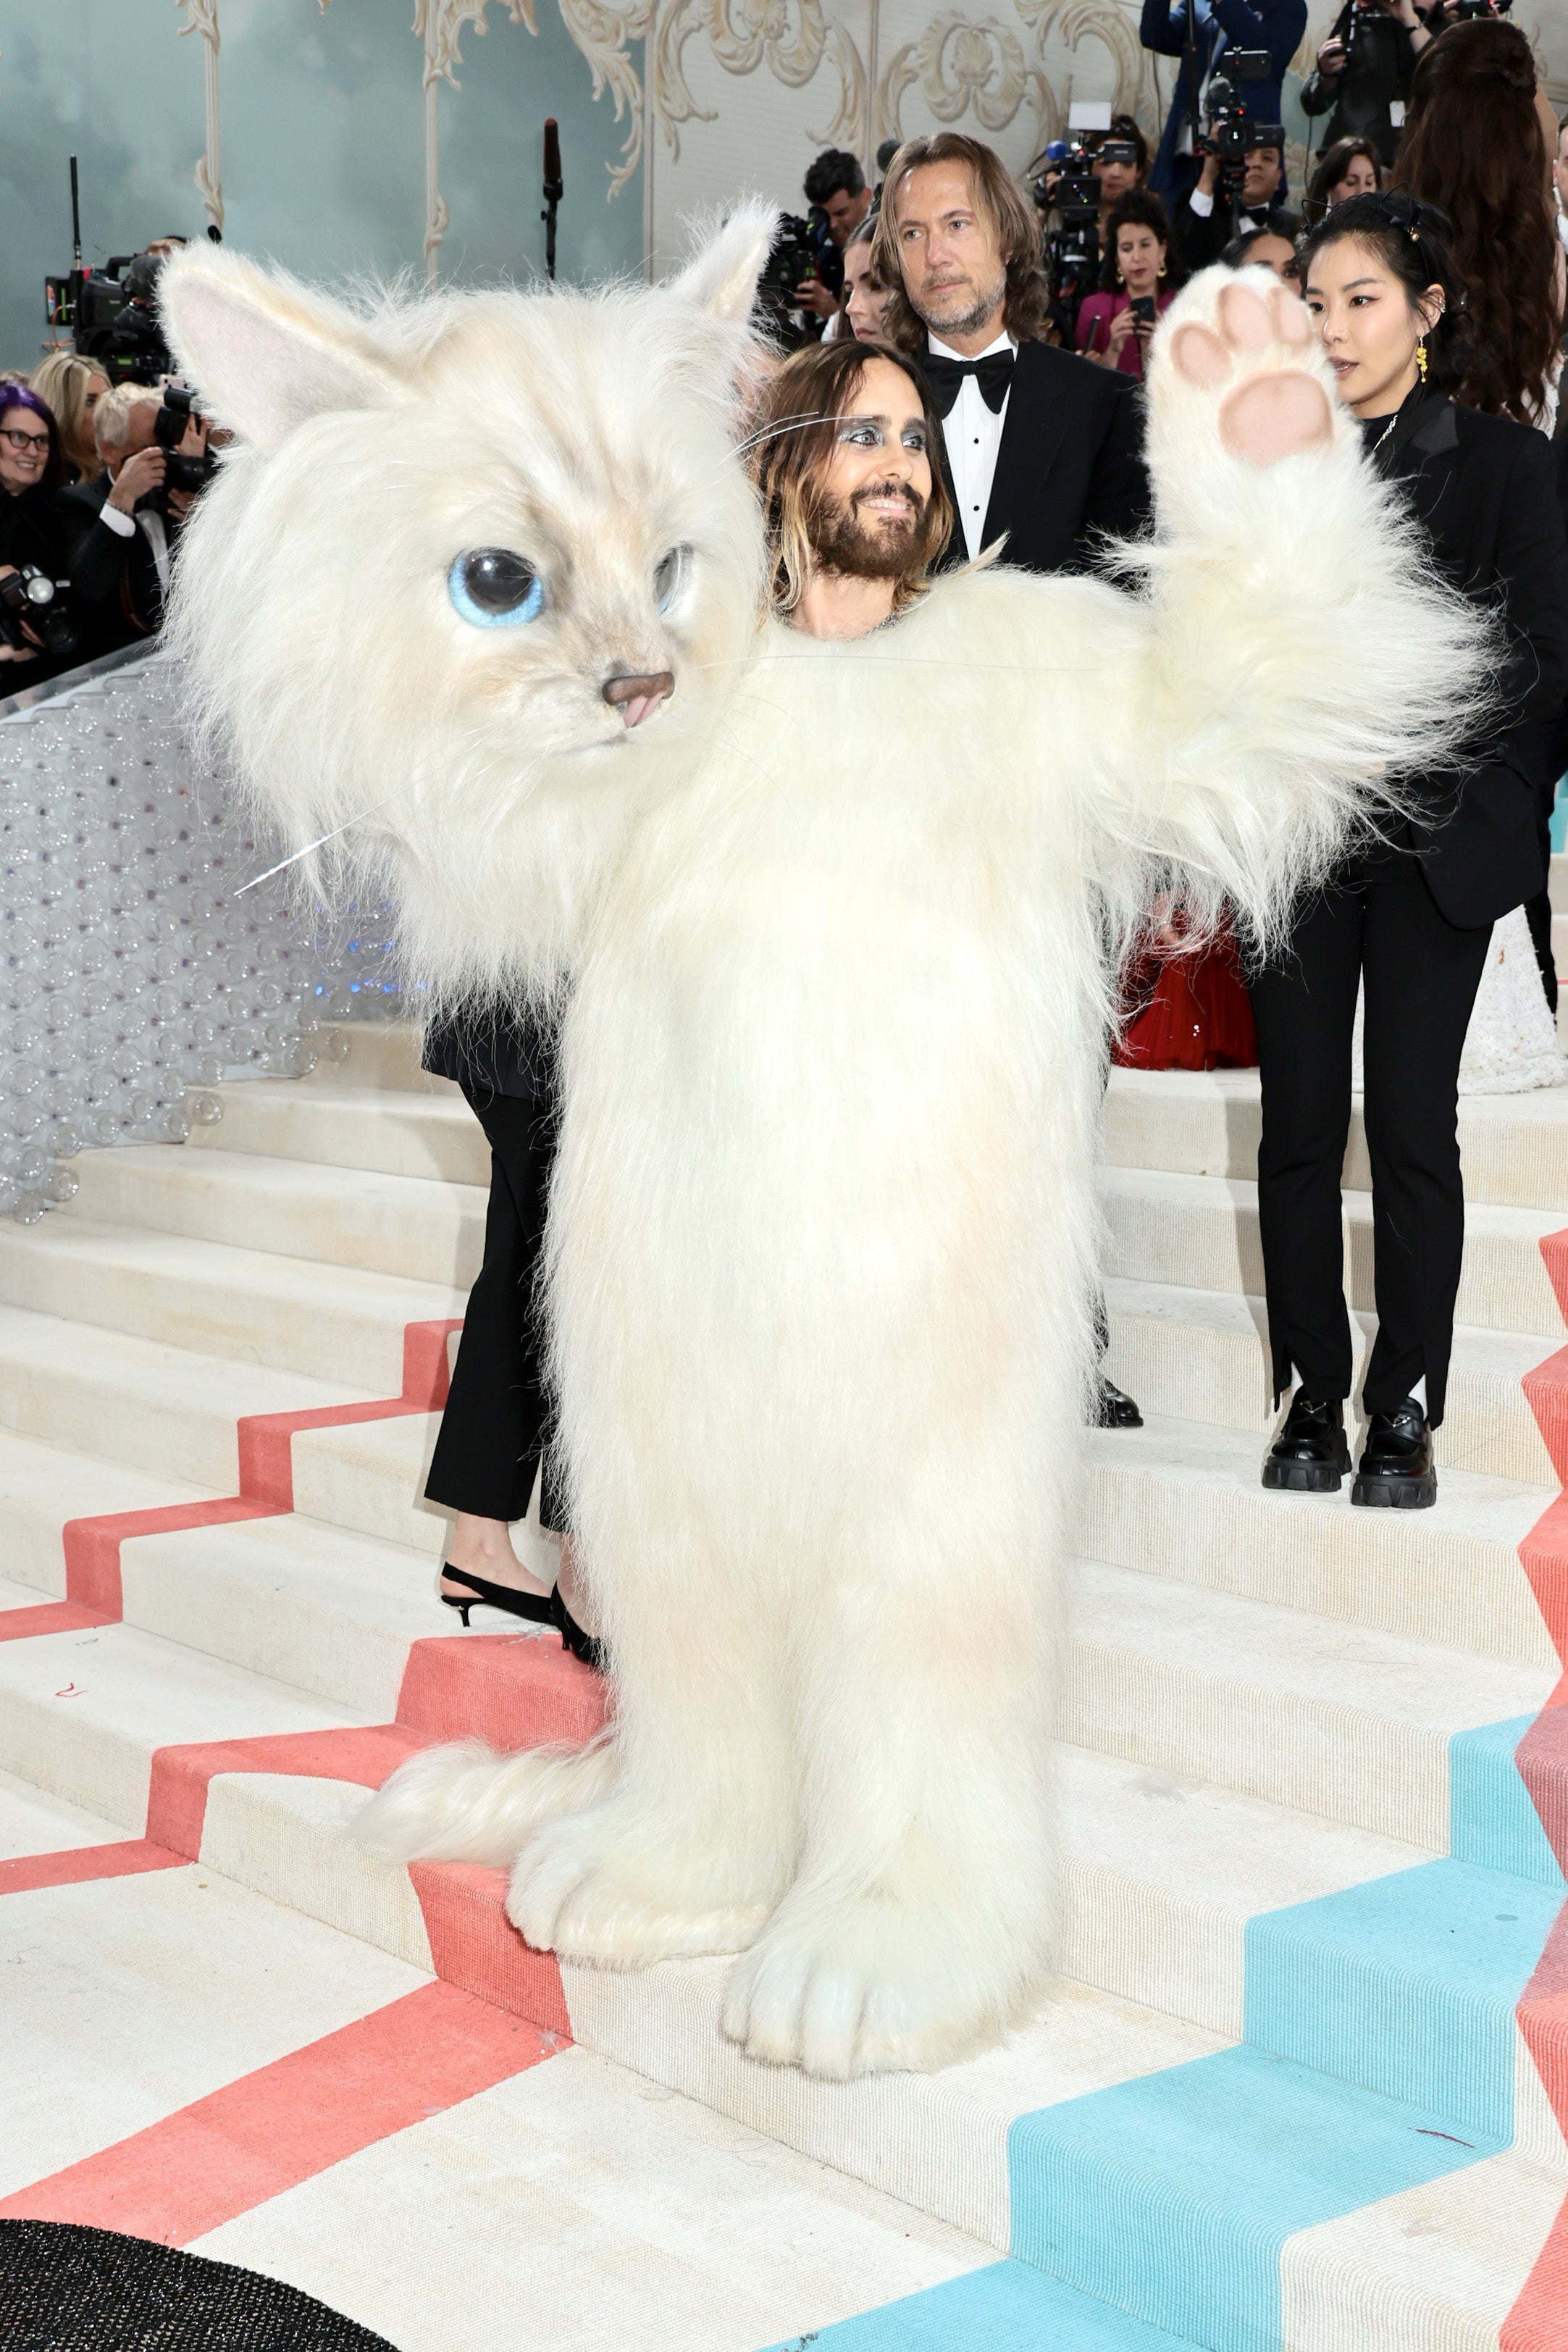 Jared Leto wore a costume designed to look like Karl Lagerfeld’s cat, Choupette, to the 2023 Met Gala